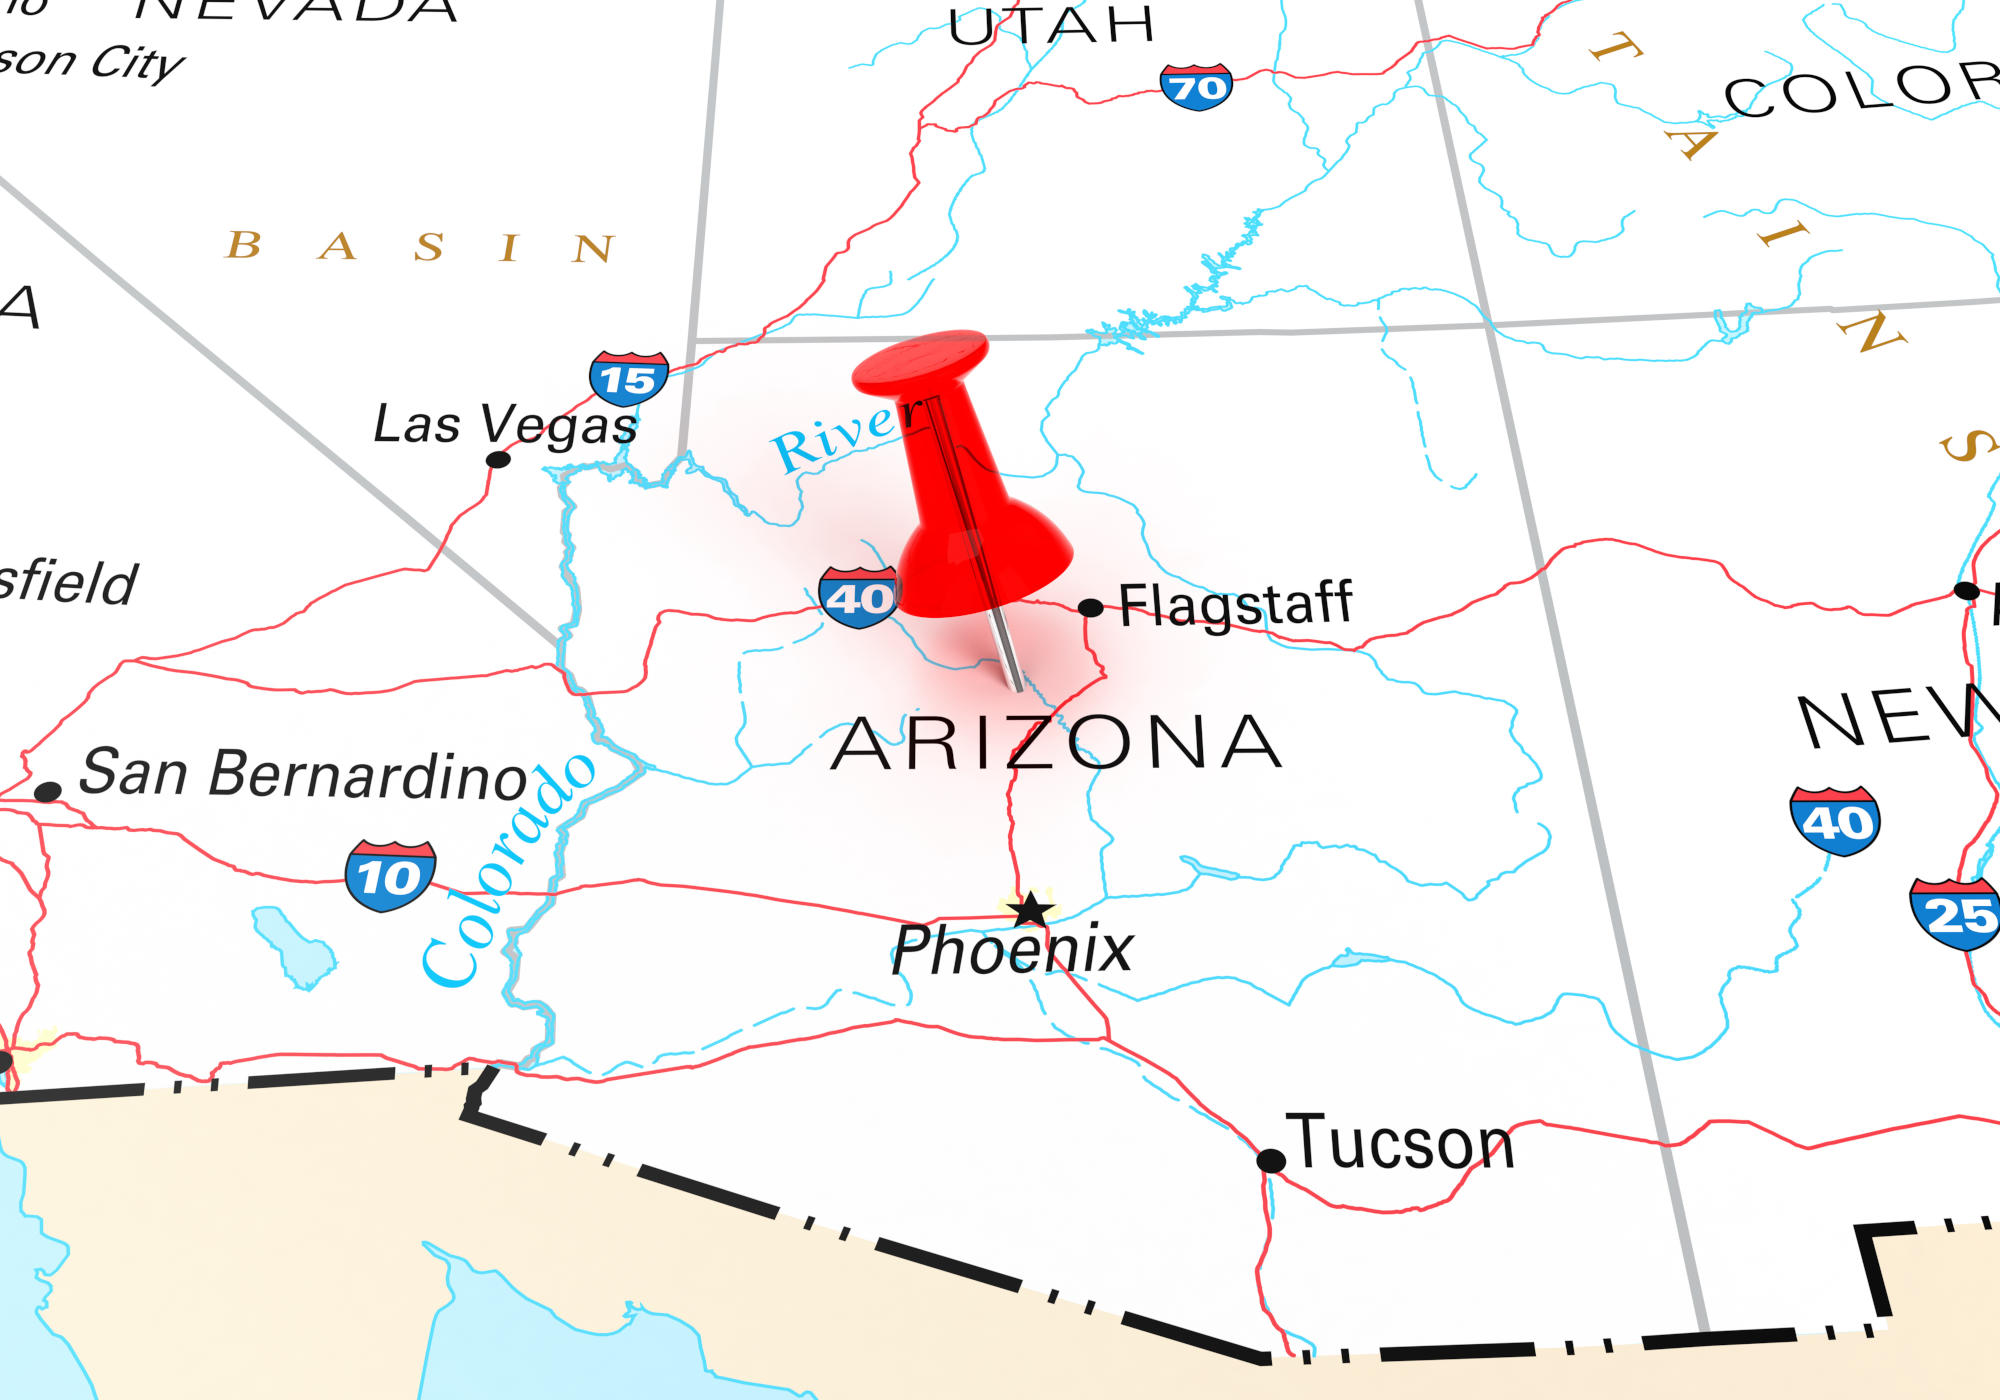 Red Thumbtack Over Arizona, Map is Copyright Free Off a Government Website - nationalatlas.gov